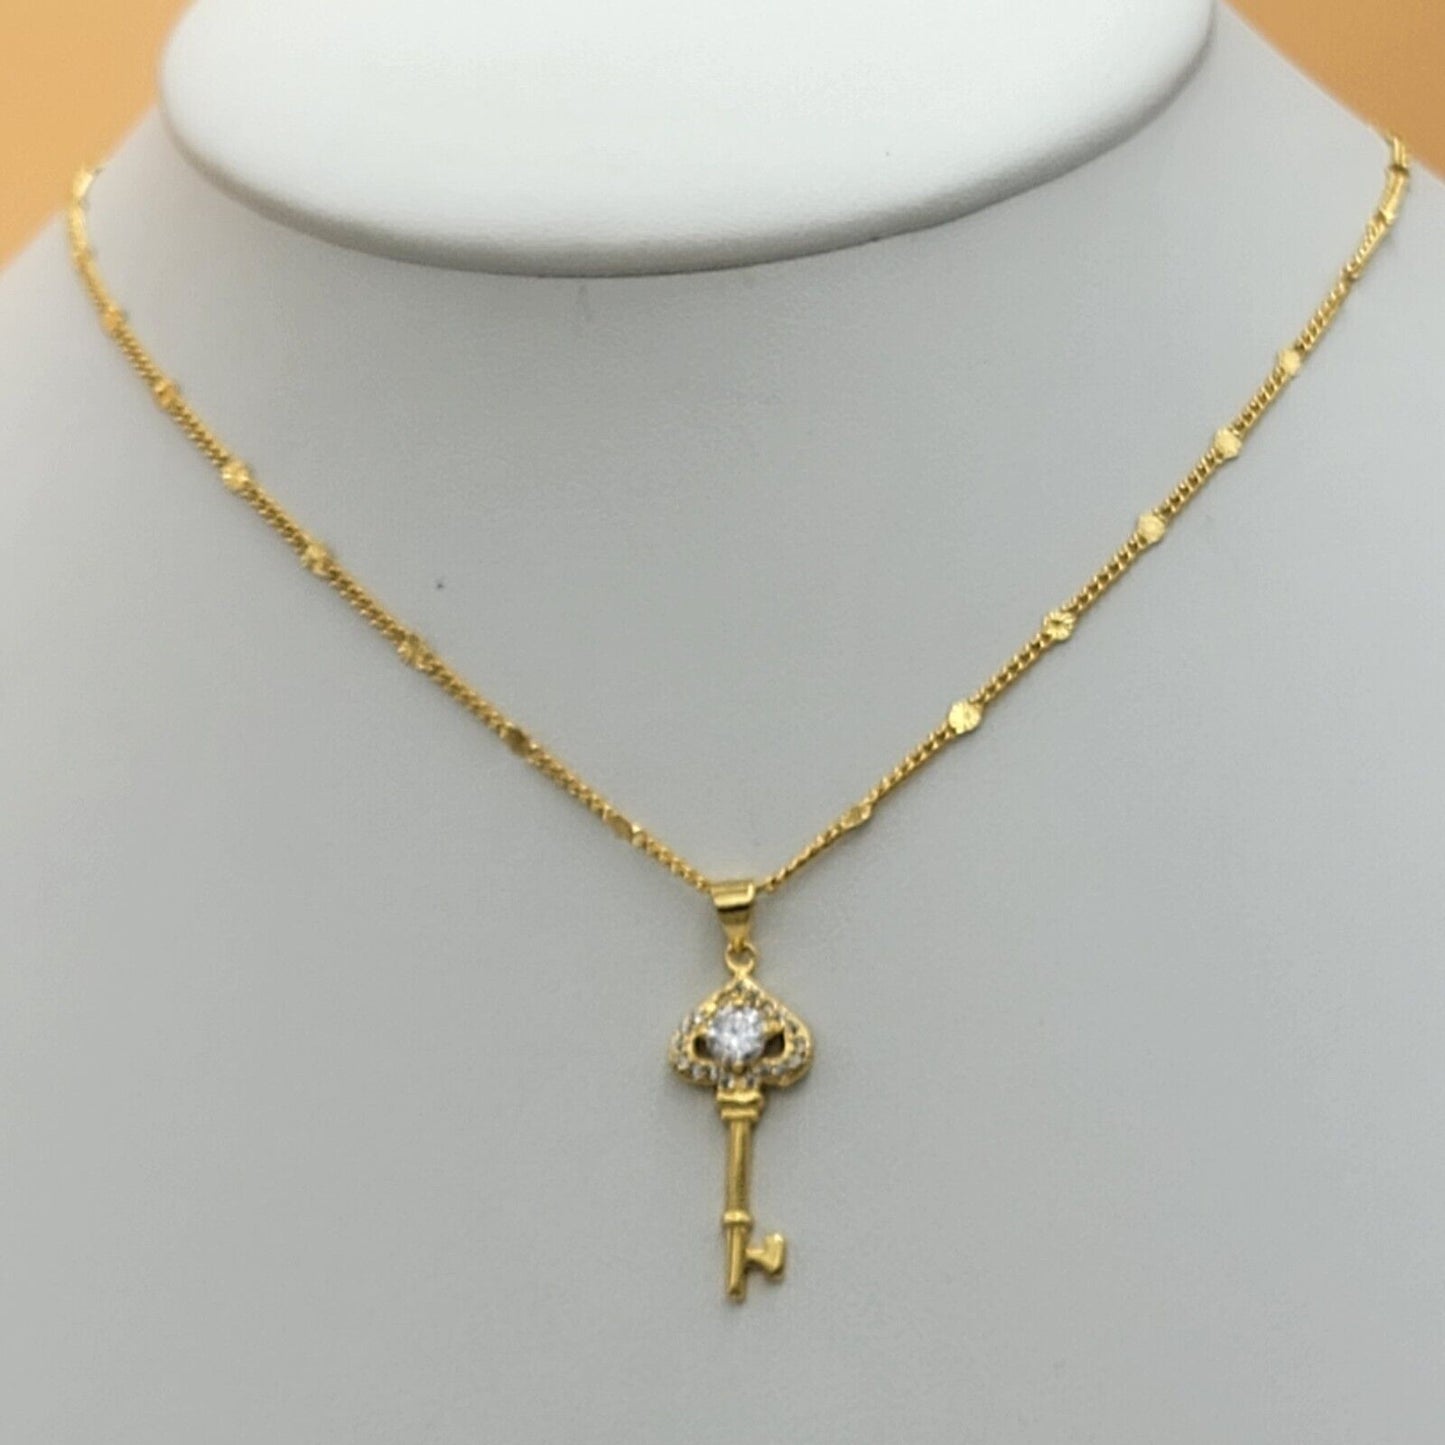 Necklaces - 24K Gold Plated. Key Pendant & Chain.